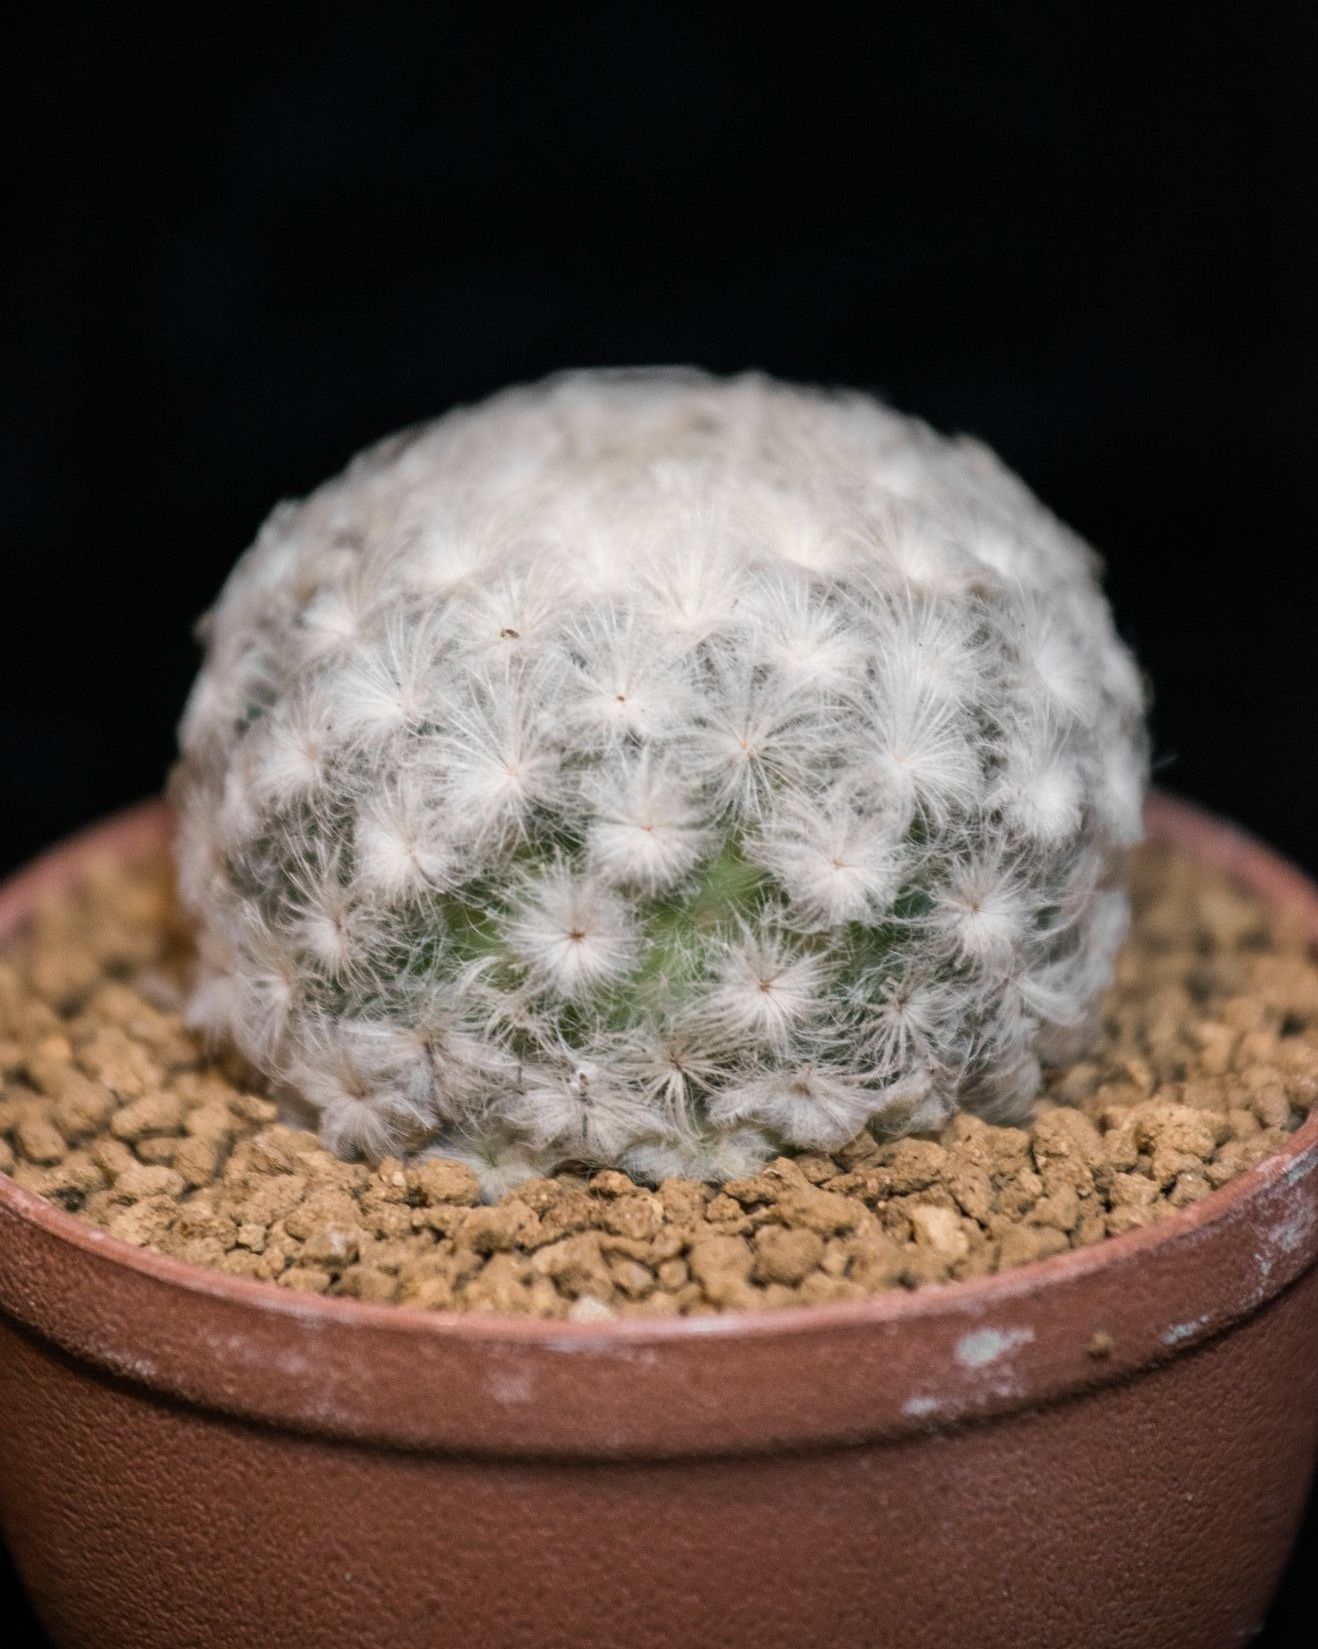 mammillaria plumosa, a ball shaped type of cactus covered in white feathery spines in pot